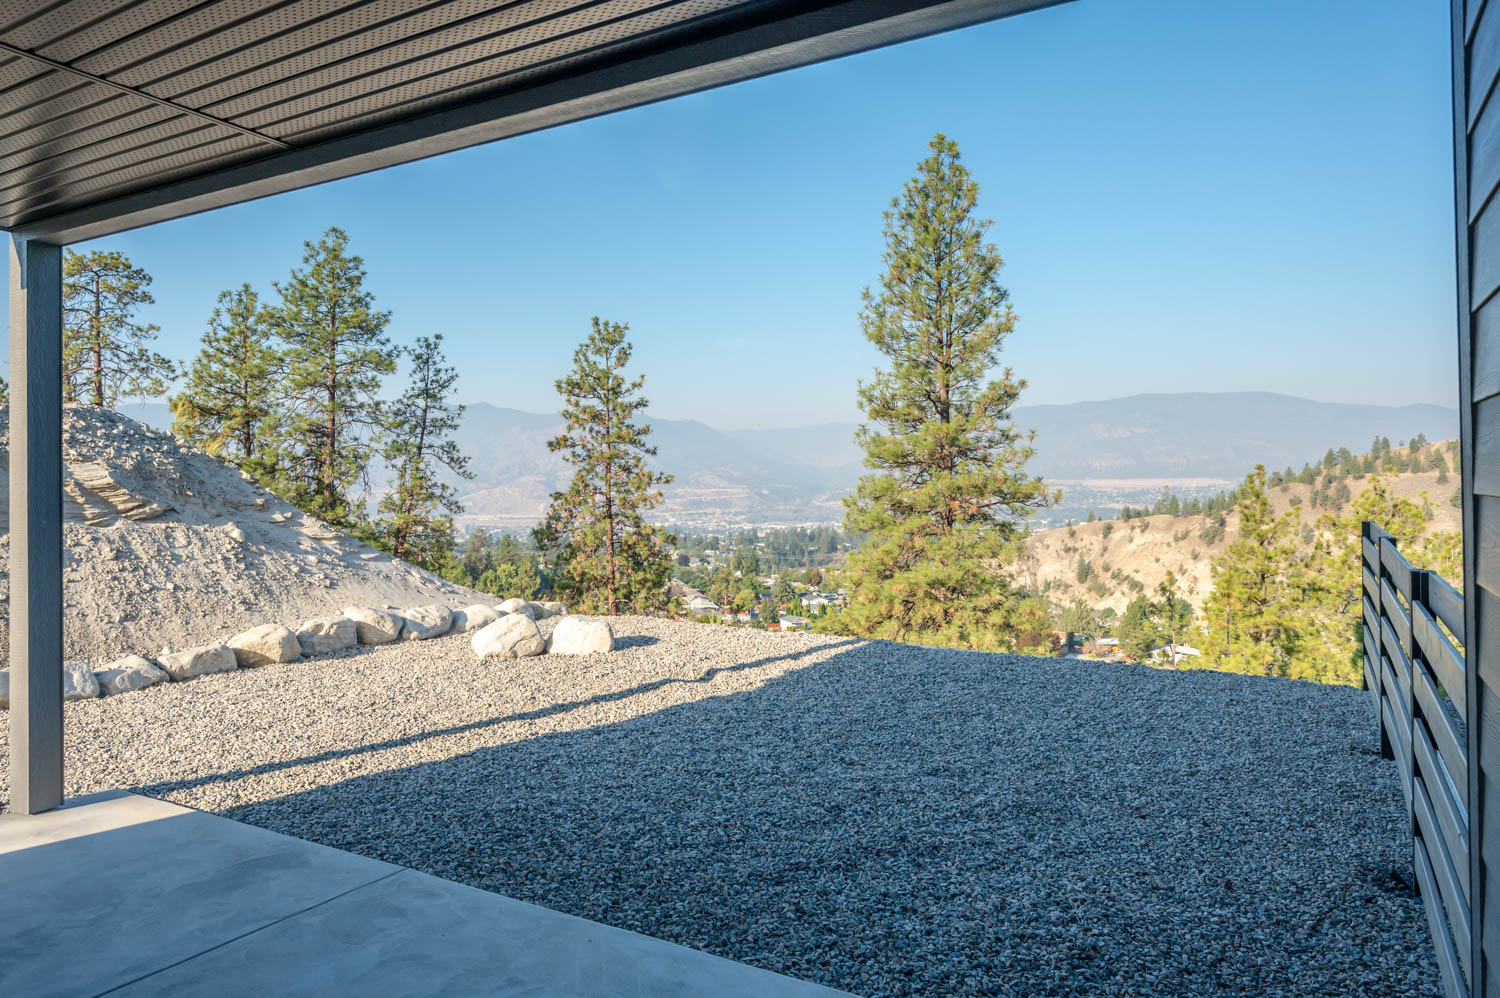 A mountain view patio overlooking a city, perfect for relaxing and enjoying the scenery.